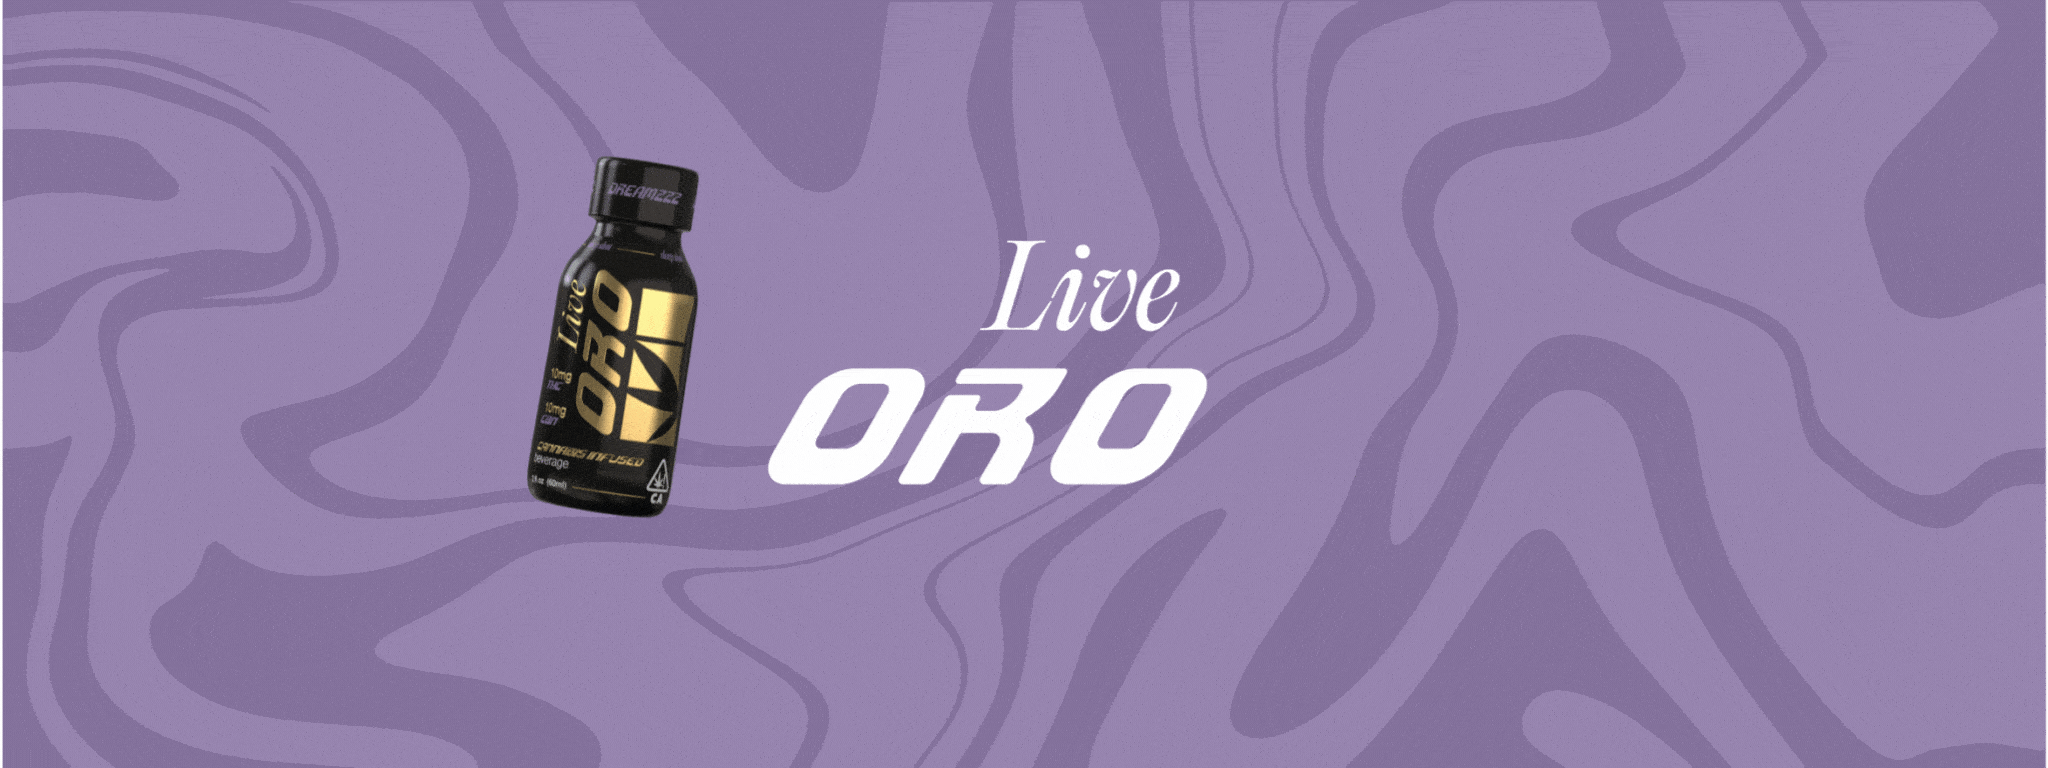 Live Oro with rotating sleep aid bottle.